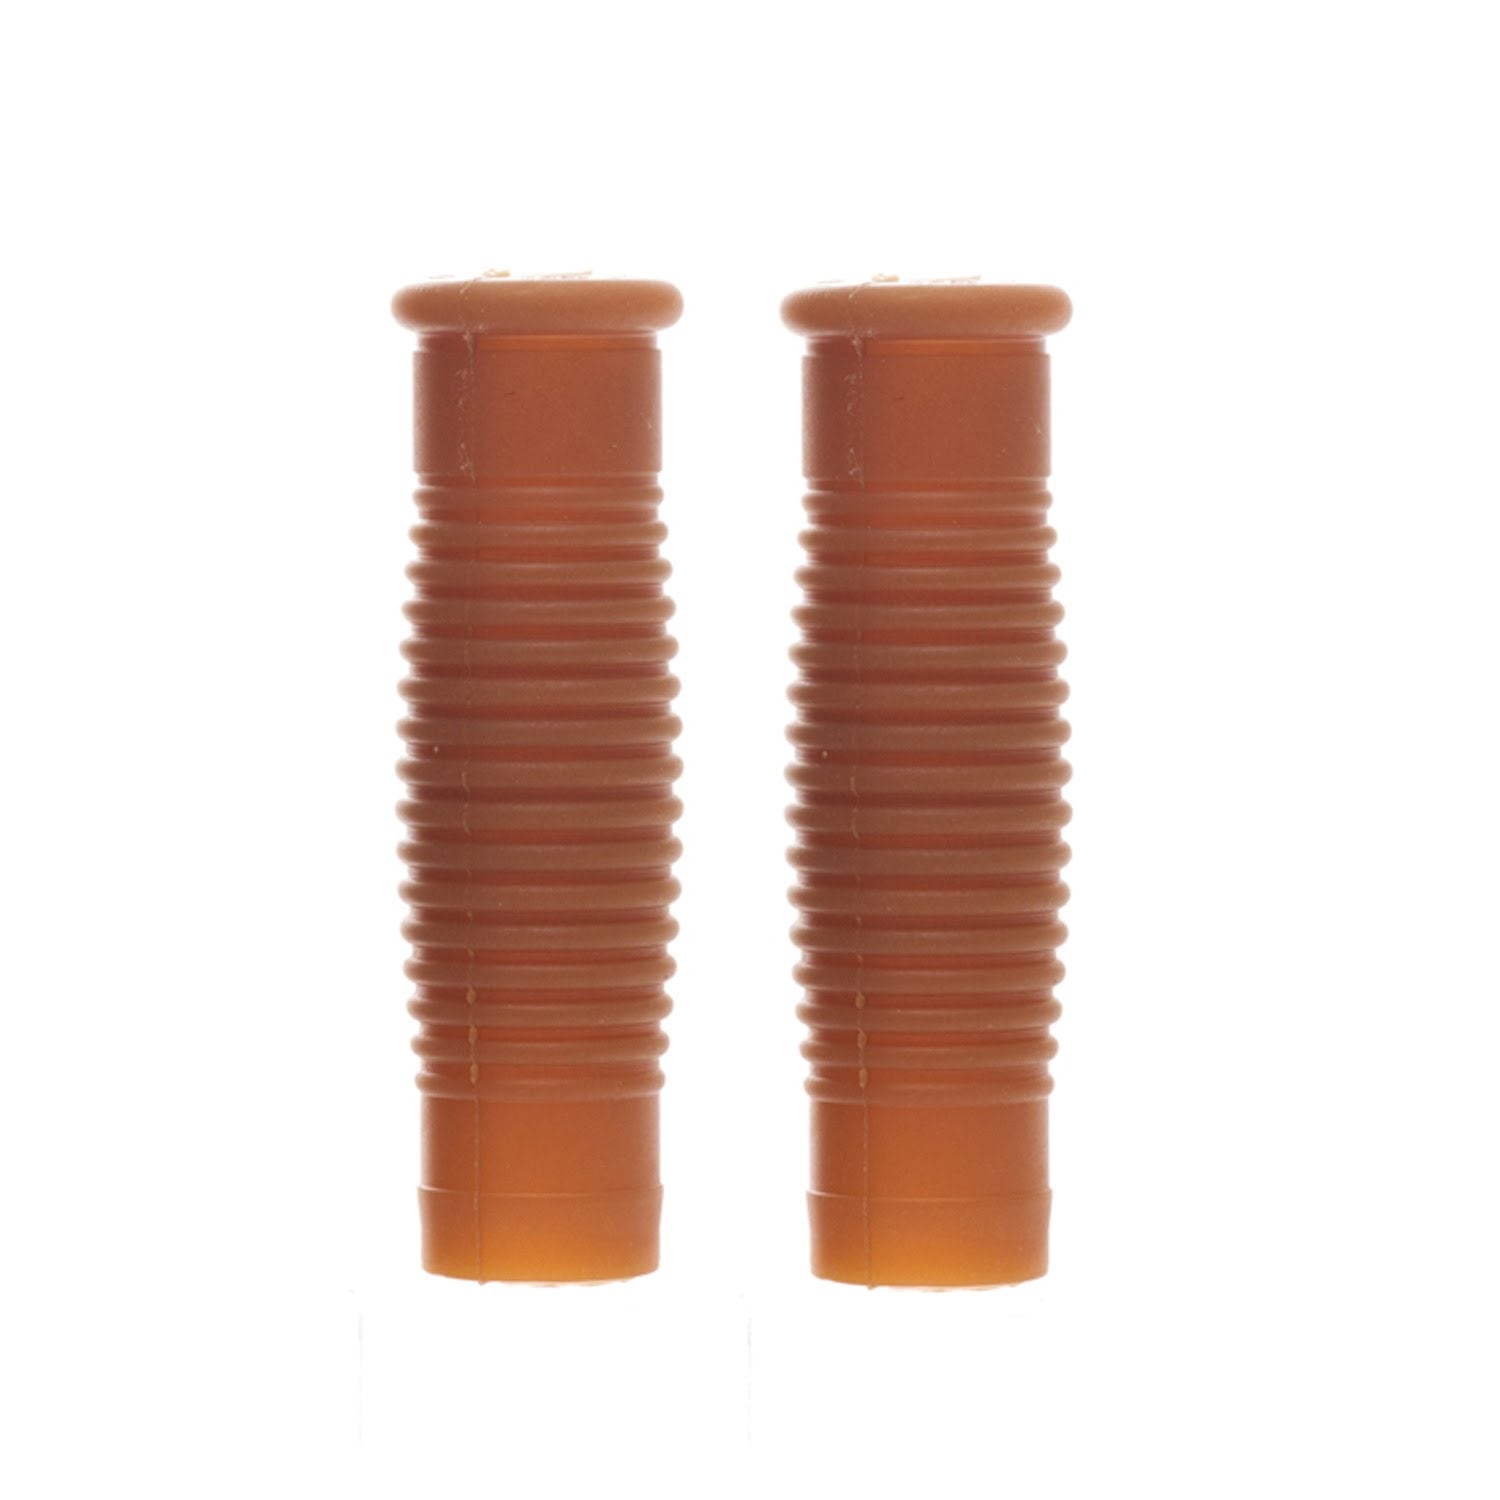 RUSTINES Constructer Rubber Grips